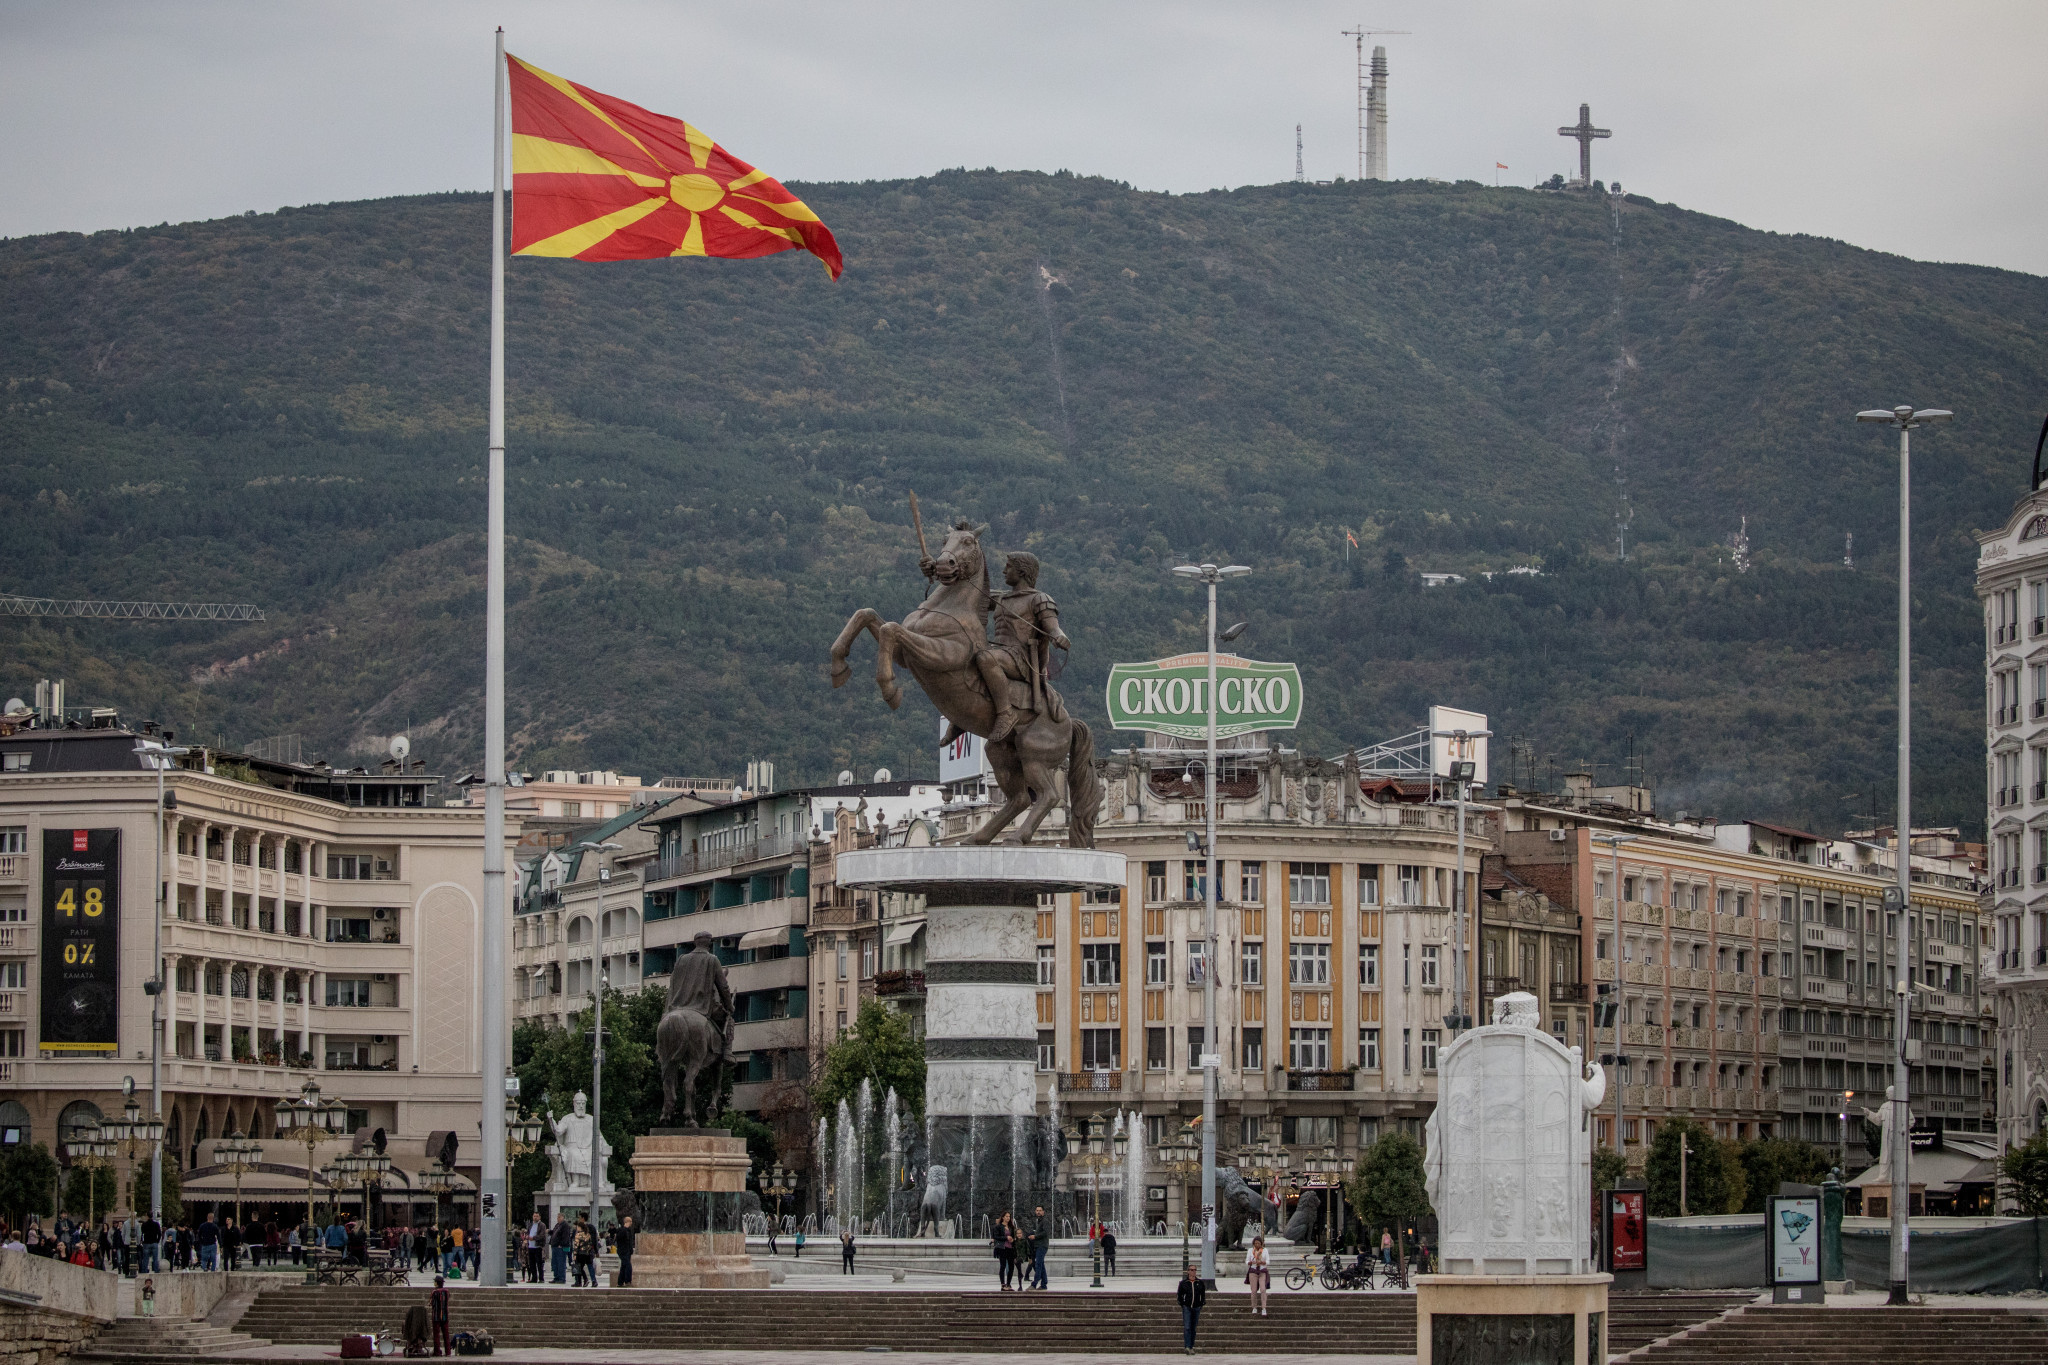 North Macedonia's capital Skopje is set to host matches at the IHF Women's Youth World Championship ©Getty Images